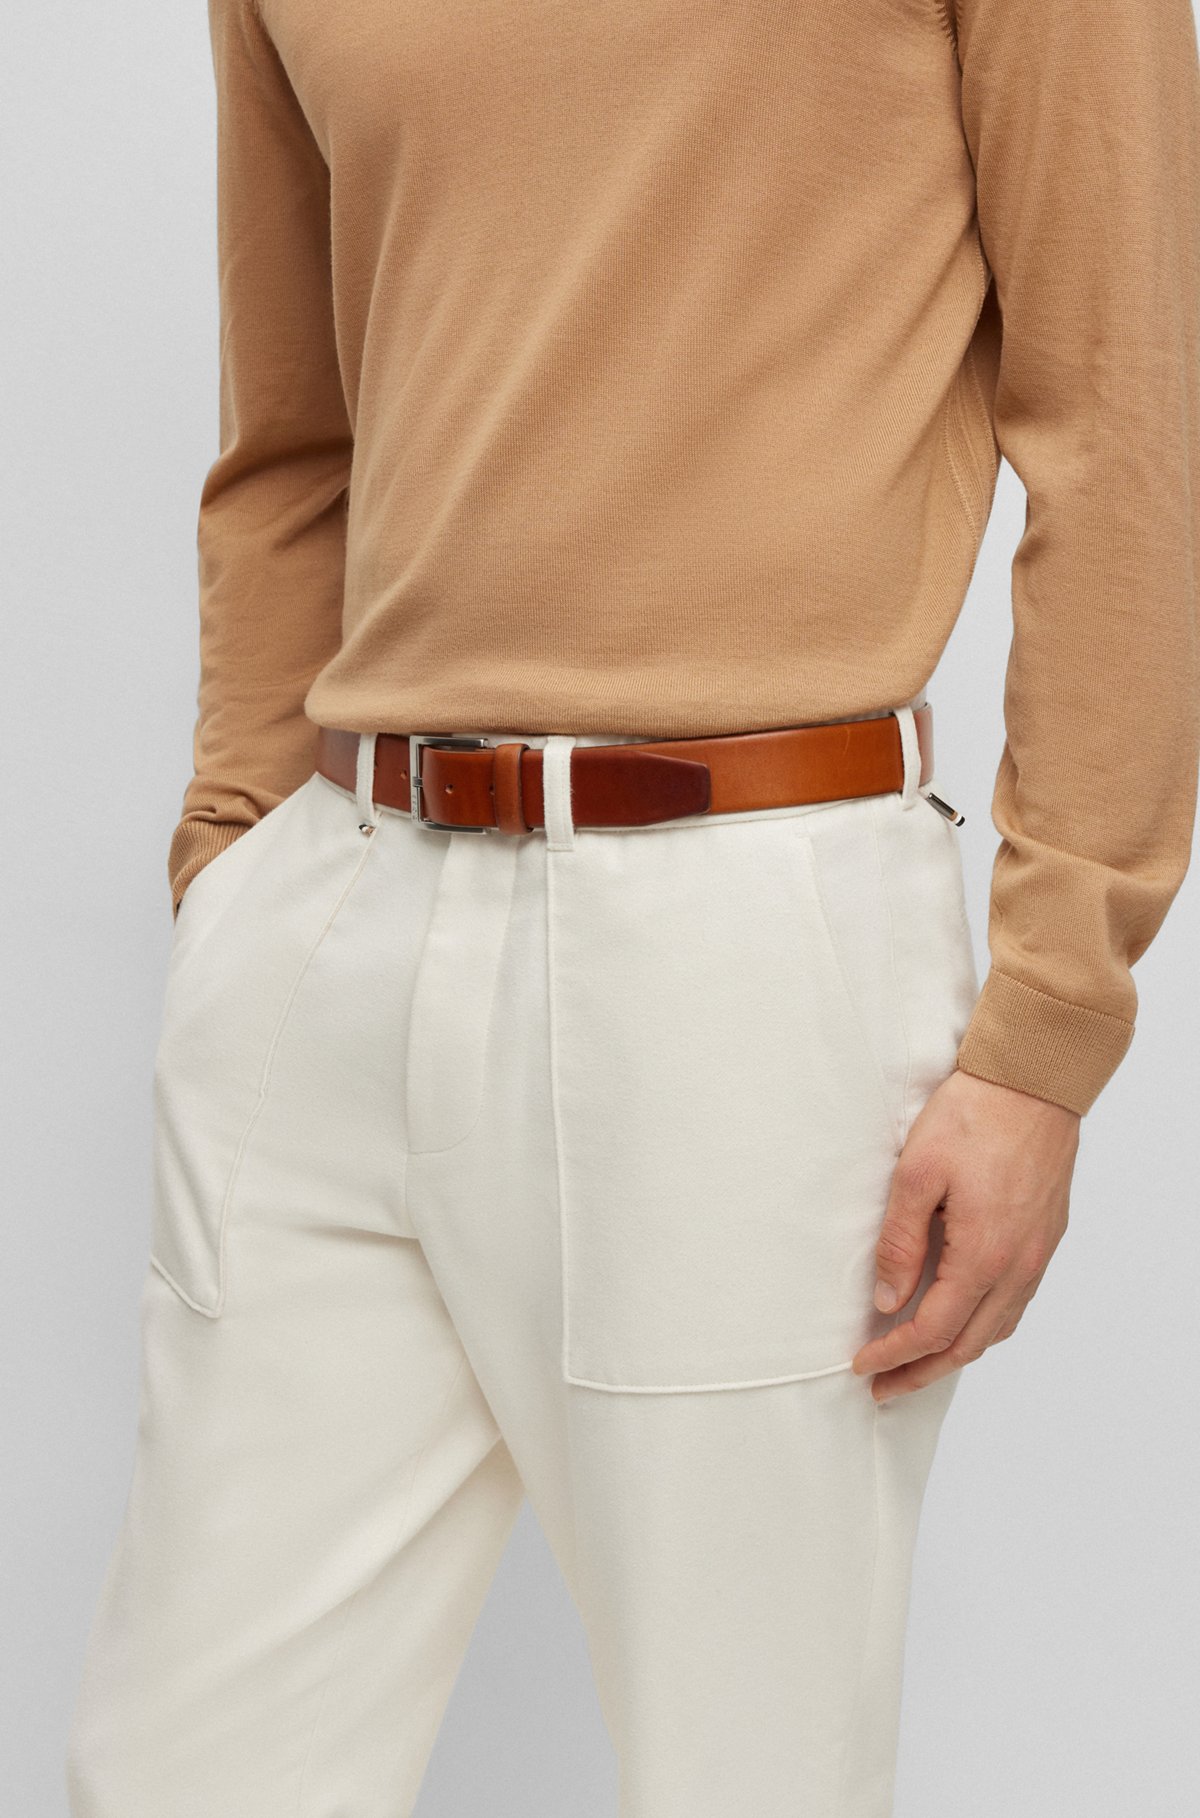 Italian-leather belt with silver-toned buckle, Brown